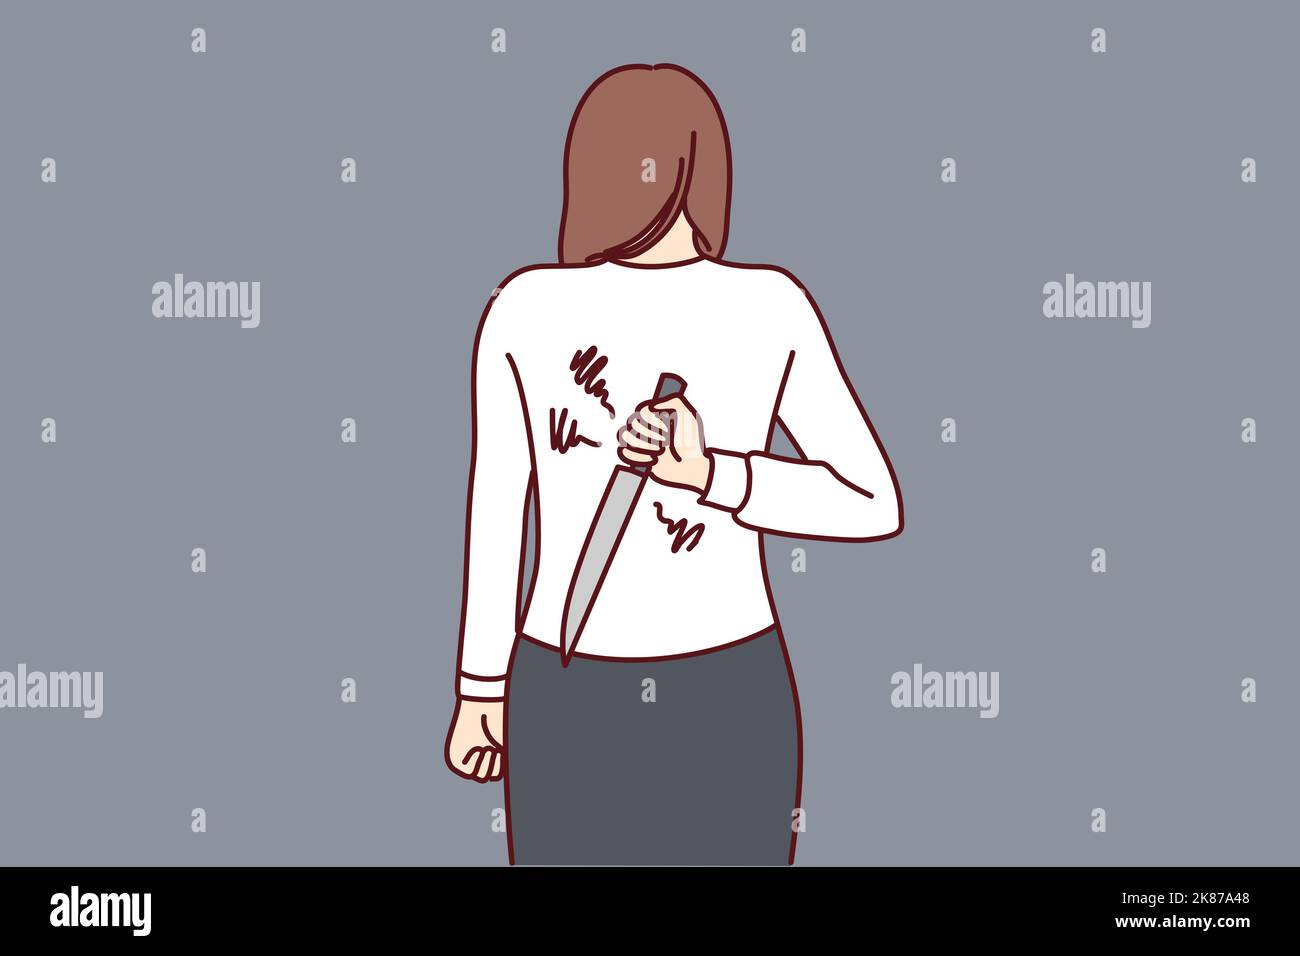 Woman hiding knife behind back ready to betray or attack. Businesswoman with weapon hidden. Risky deal or rivalry. Vector illustration.  Stock Vector